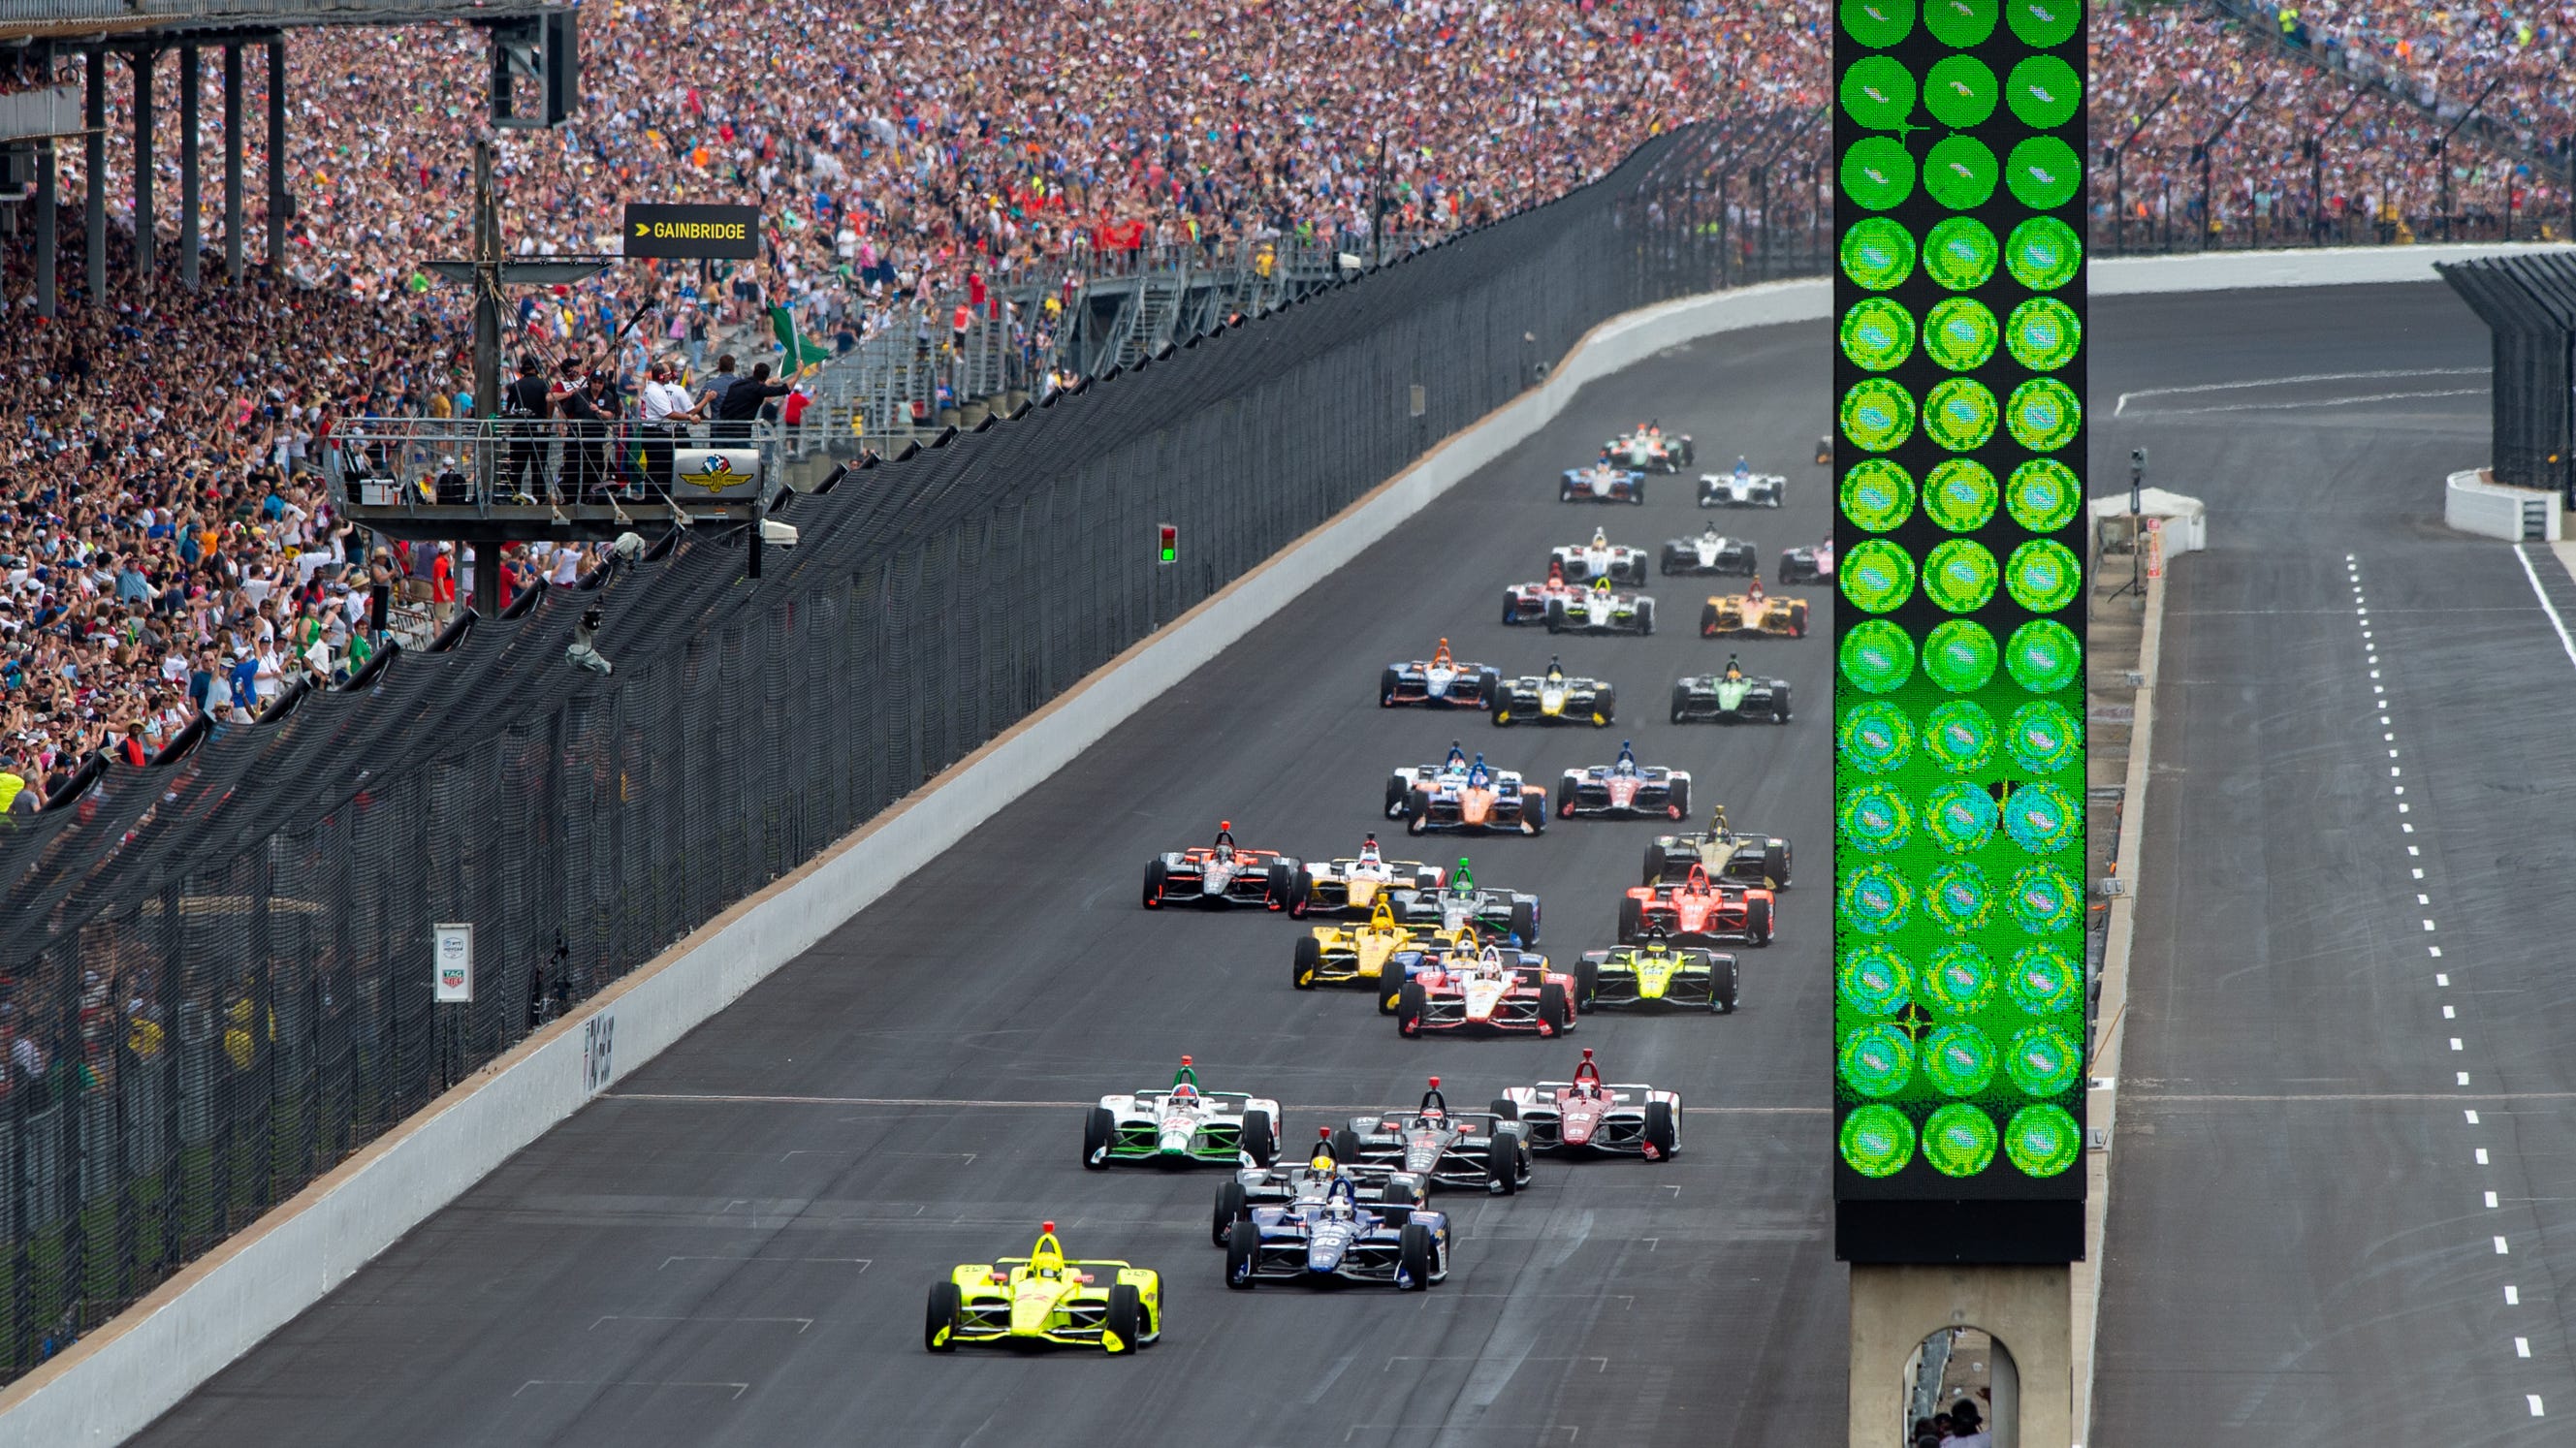 Indy 500 will have about 135,000 fans at Indianapolis Motor Speedway